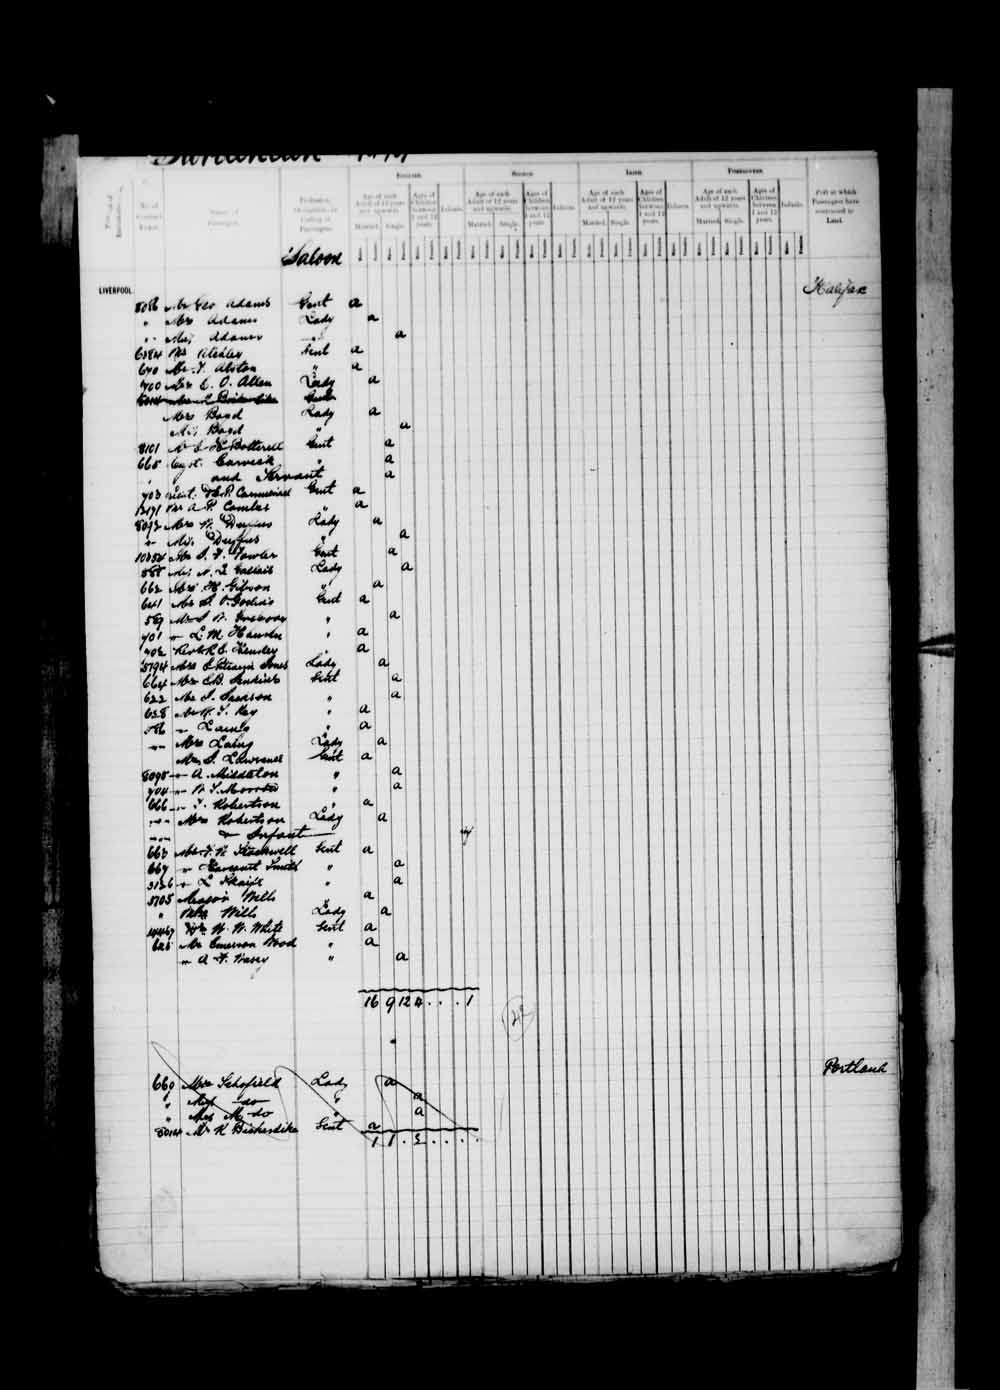 Digitized page of Passenger Lists for Image No.: e003674935